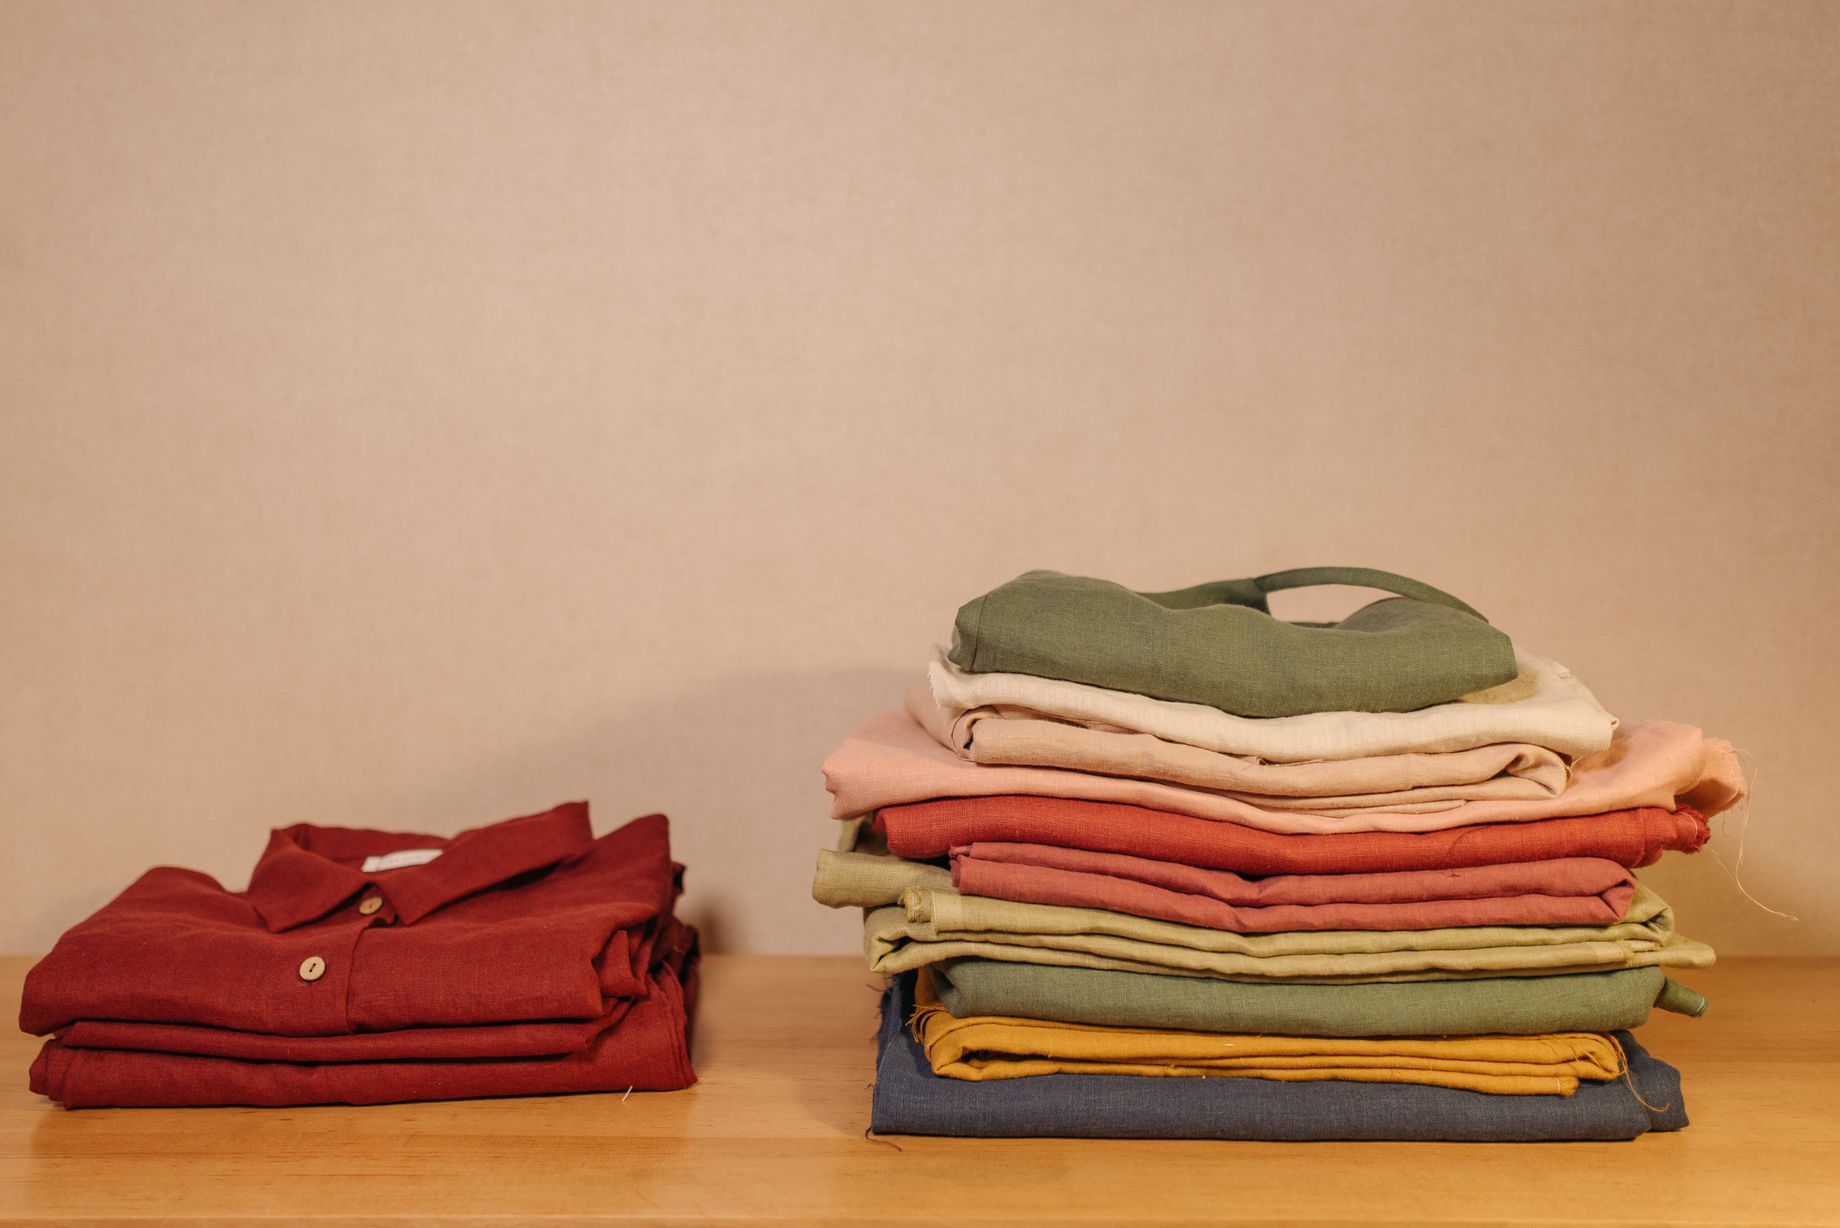 Folded Clothes on the Wooden Table